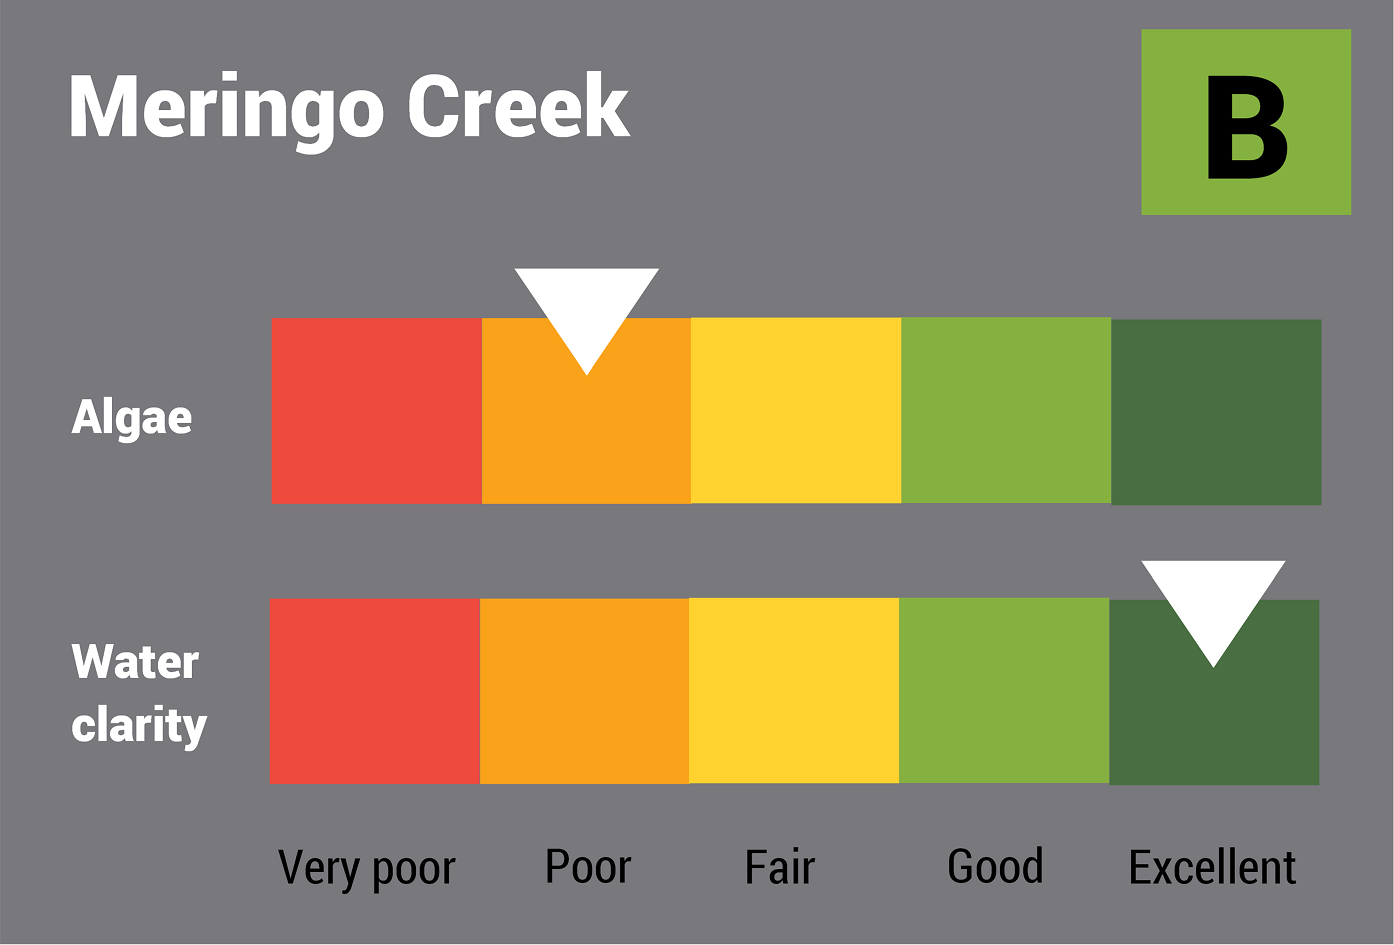 Meringo Creek water quality report card for algae and water clarity showing colour-coded ratings (red, orange, yellow, light green and dark green, which represent very poor, poor, fair, good and excellent, respectively). Algae is rated 'very poor' and water clarity is rated 'fair' giving an overall rating of 'poor' or 'D'.